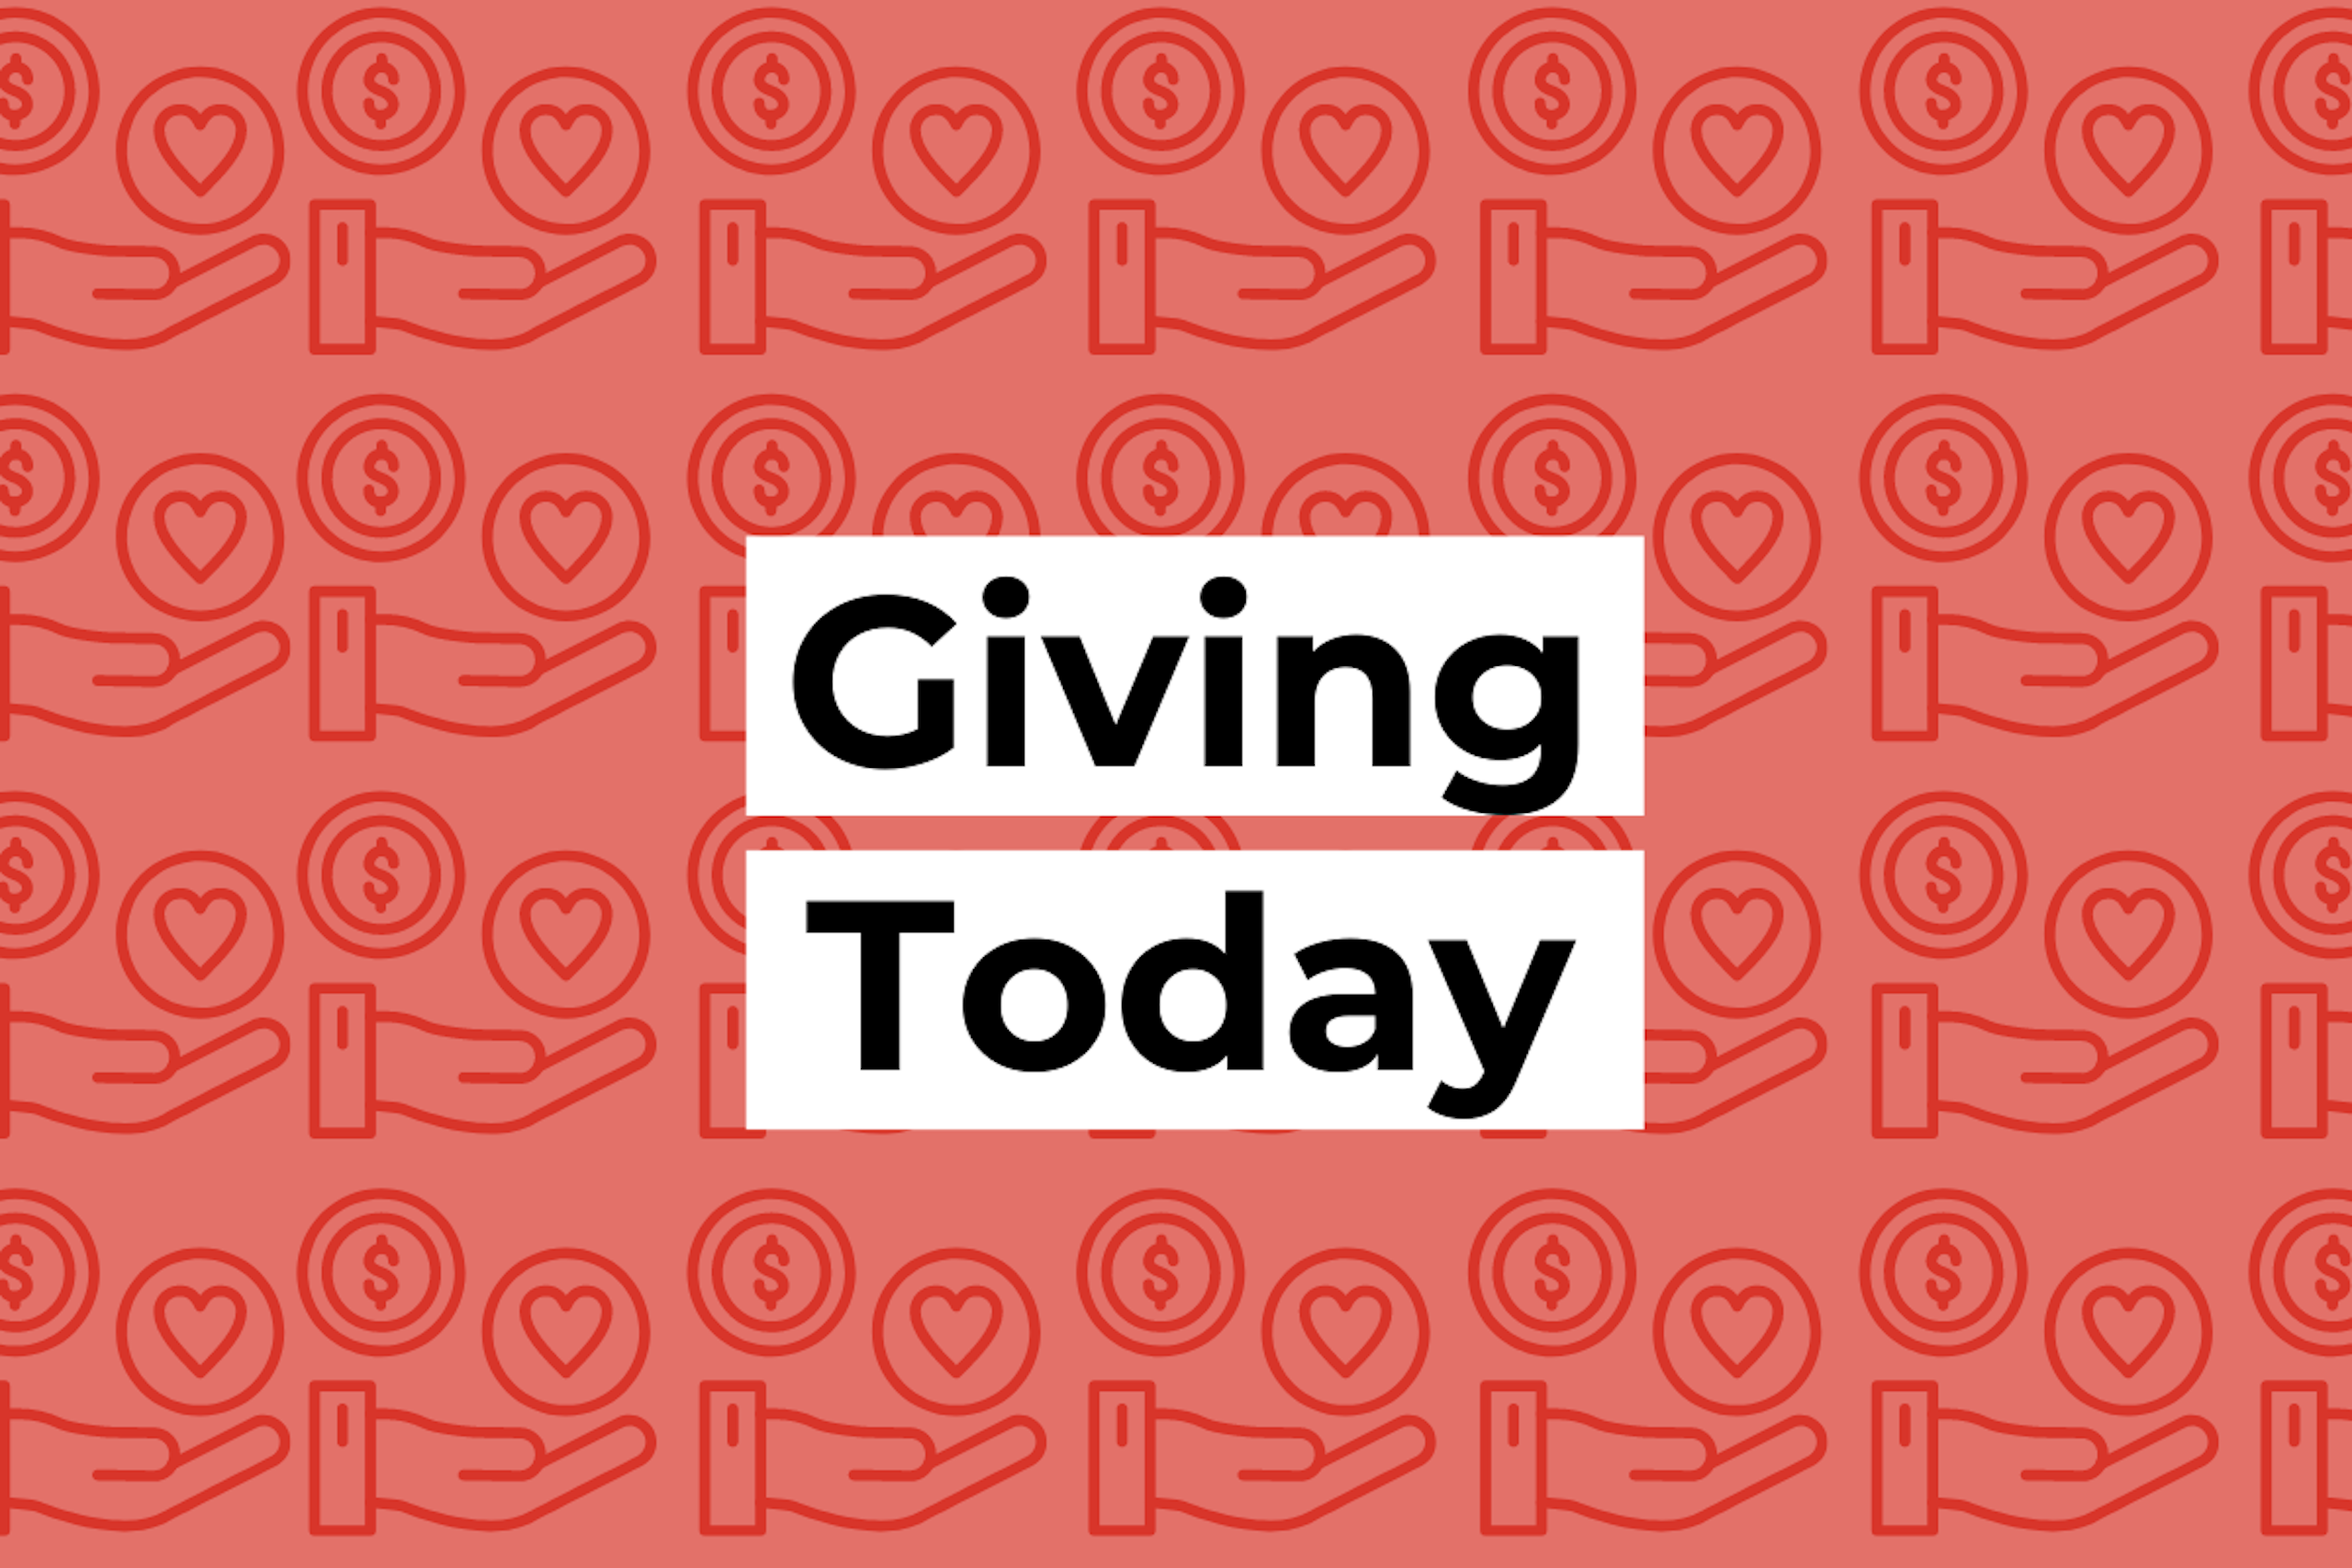 Graphic featuring heart and hand symbols. The text reads 'Giving Today'. 